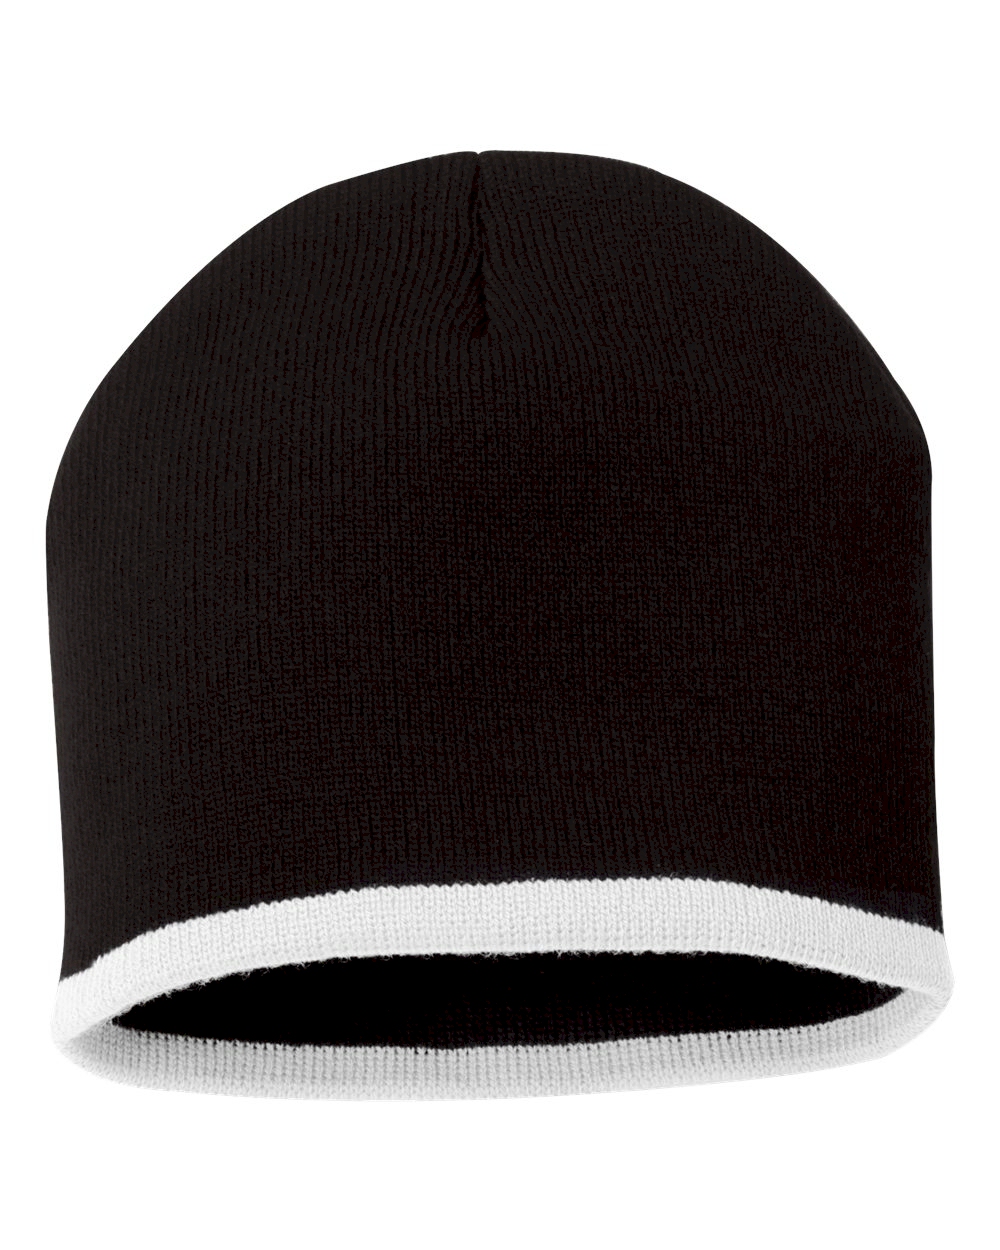 8" Knit Beanie with Striped Bottom Embroidery Blanks - BLACK/WHITE